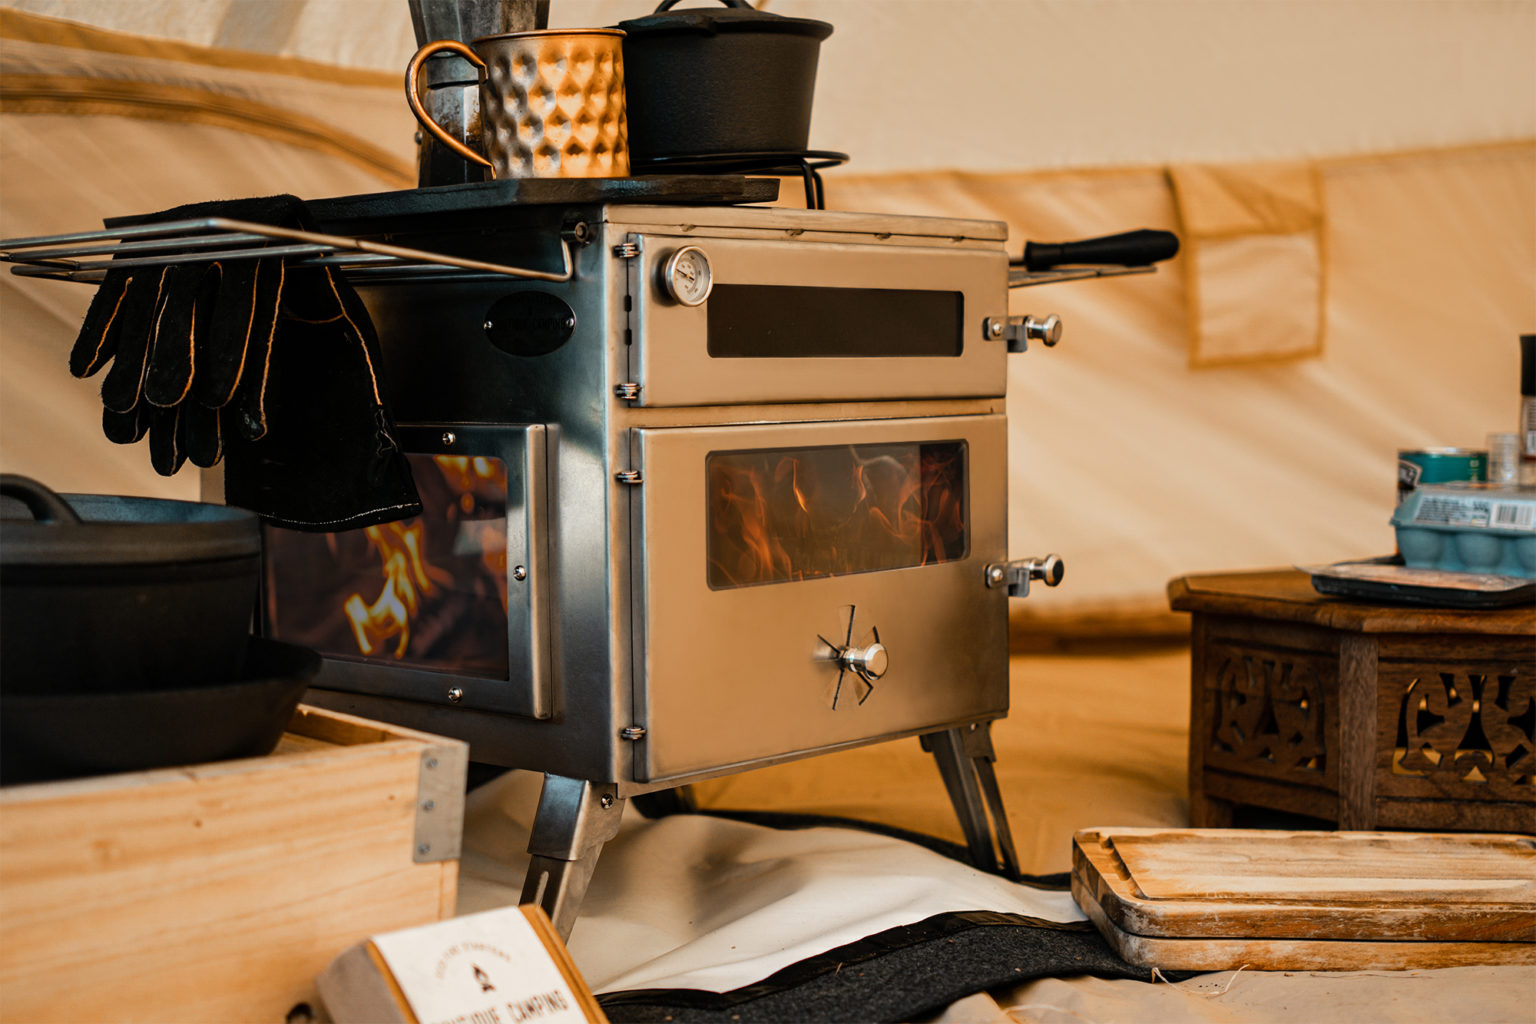 https://www.campingwithstyle.co.uk/wp-content/uploads/2021/09/WITH-FIRE-STOVE-1536x1024.jpg